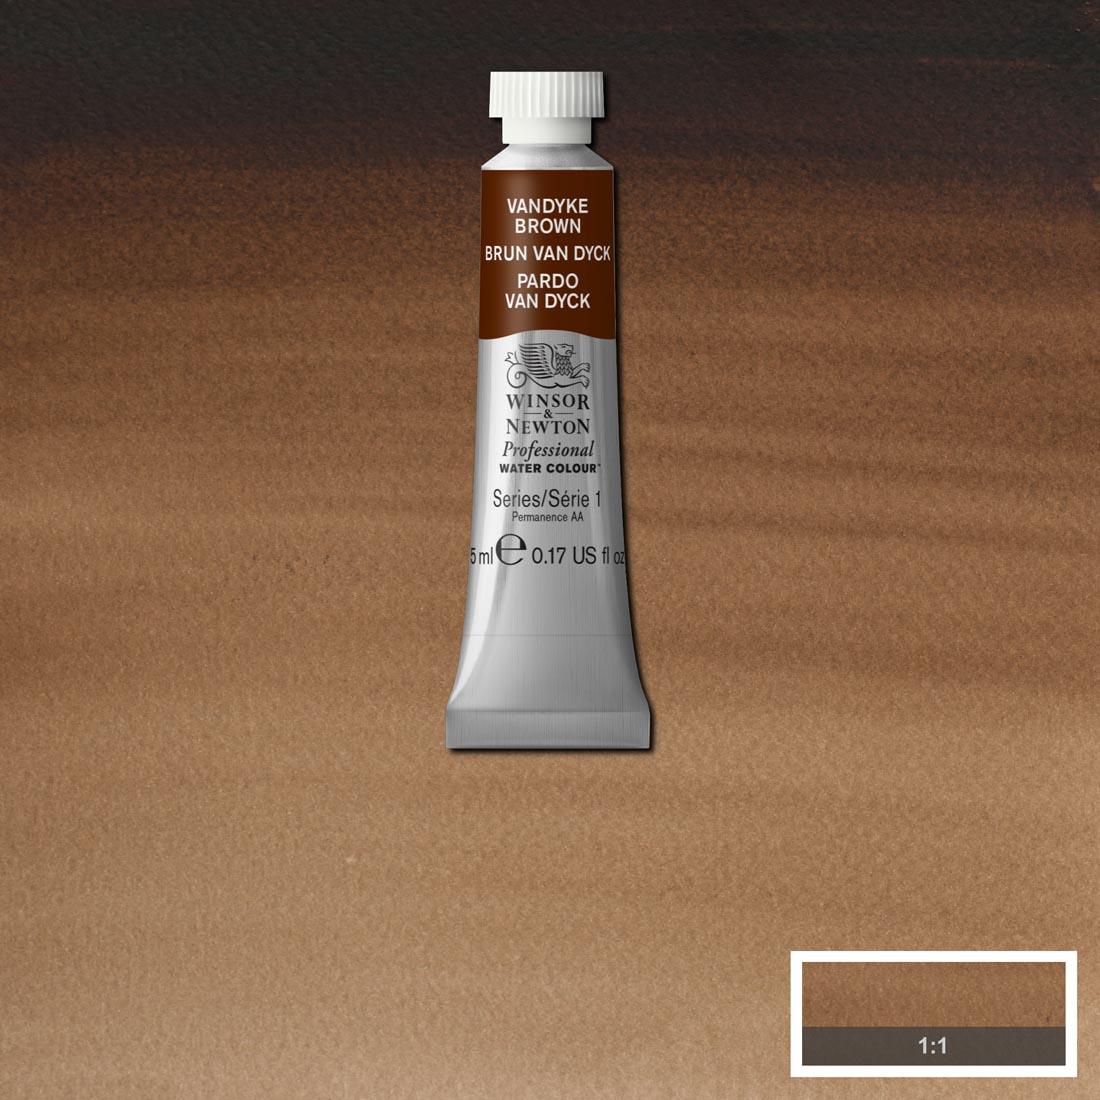 Tube of Vandyke Brown Winsor & Newton Professional Water Colour with a paint swatch for the background